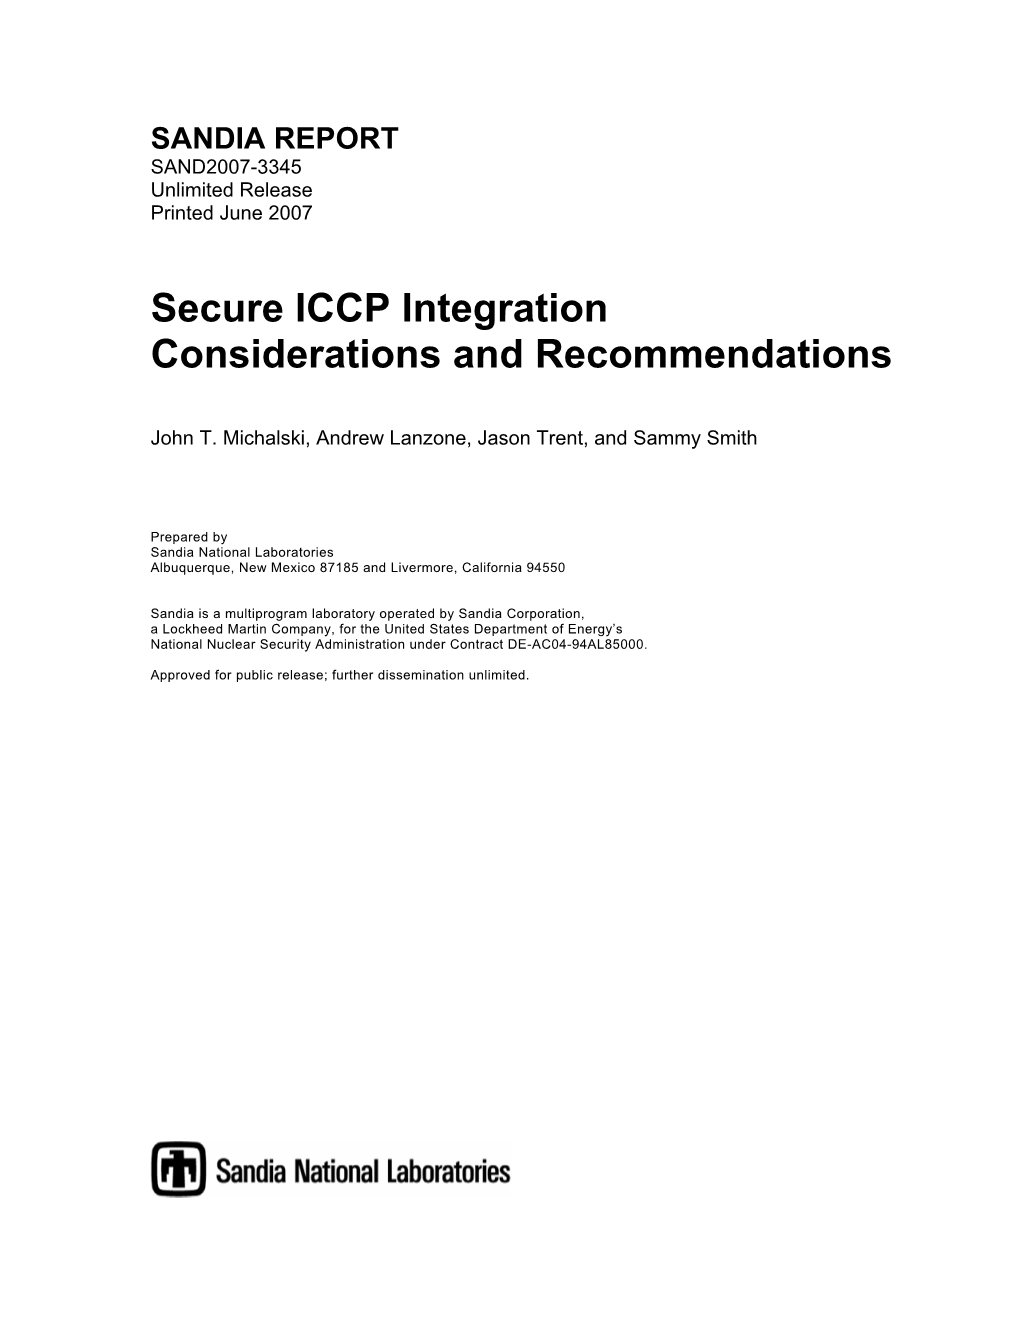 Secure ICCP Integration Considerations and Recommendations